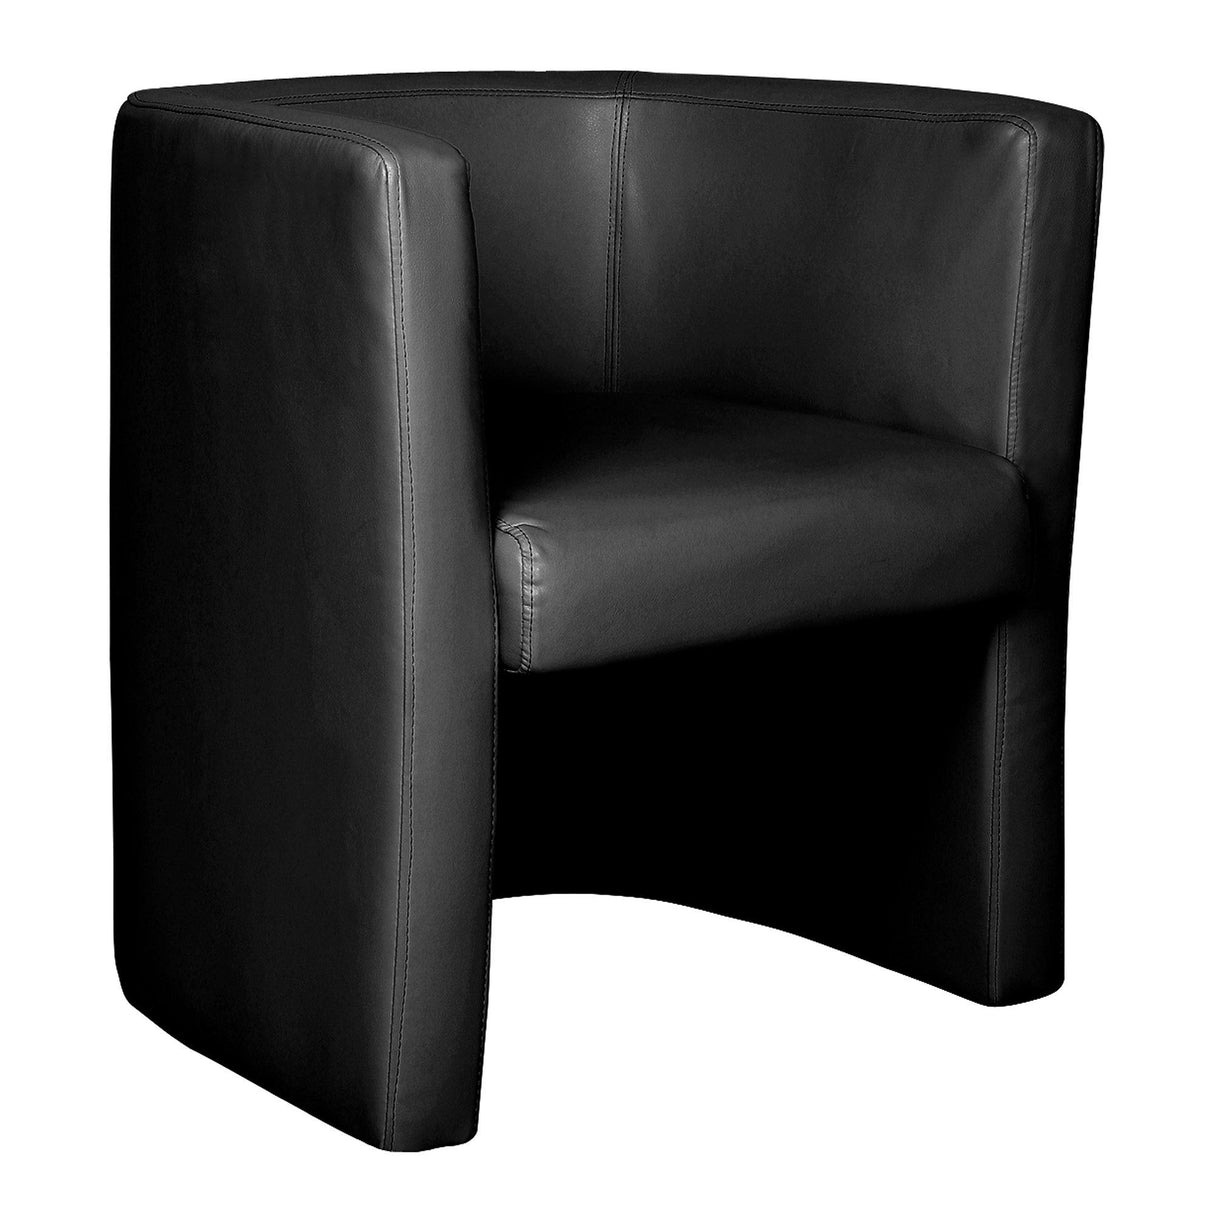 Nautilus Designs Milano Stylish & Modern Low Back Leather Faced Tub Chair - Black